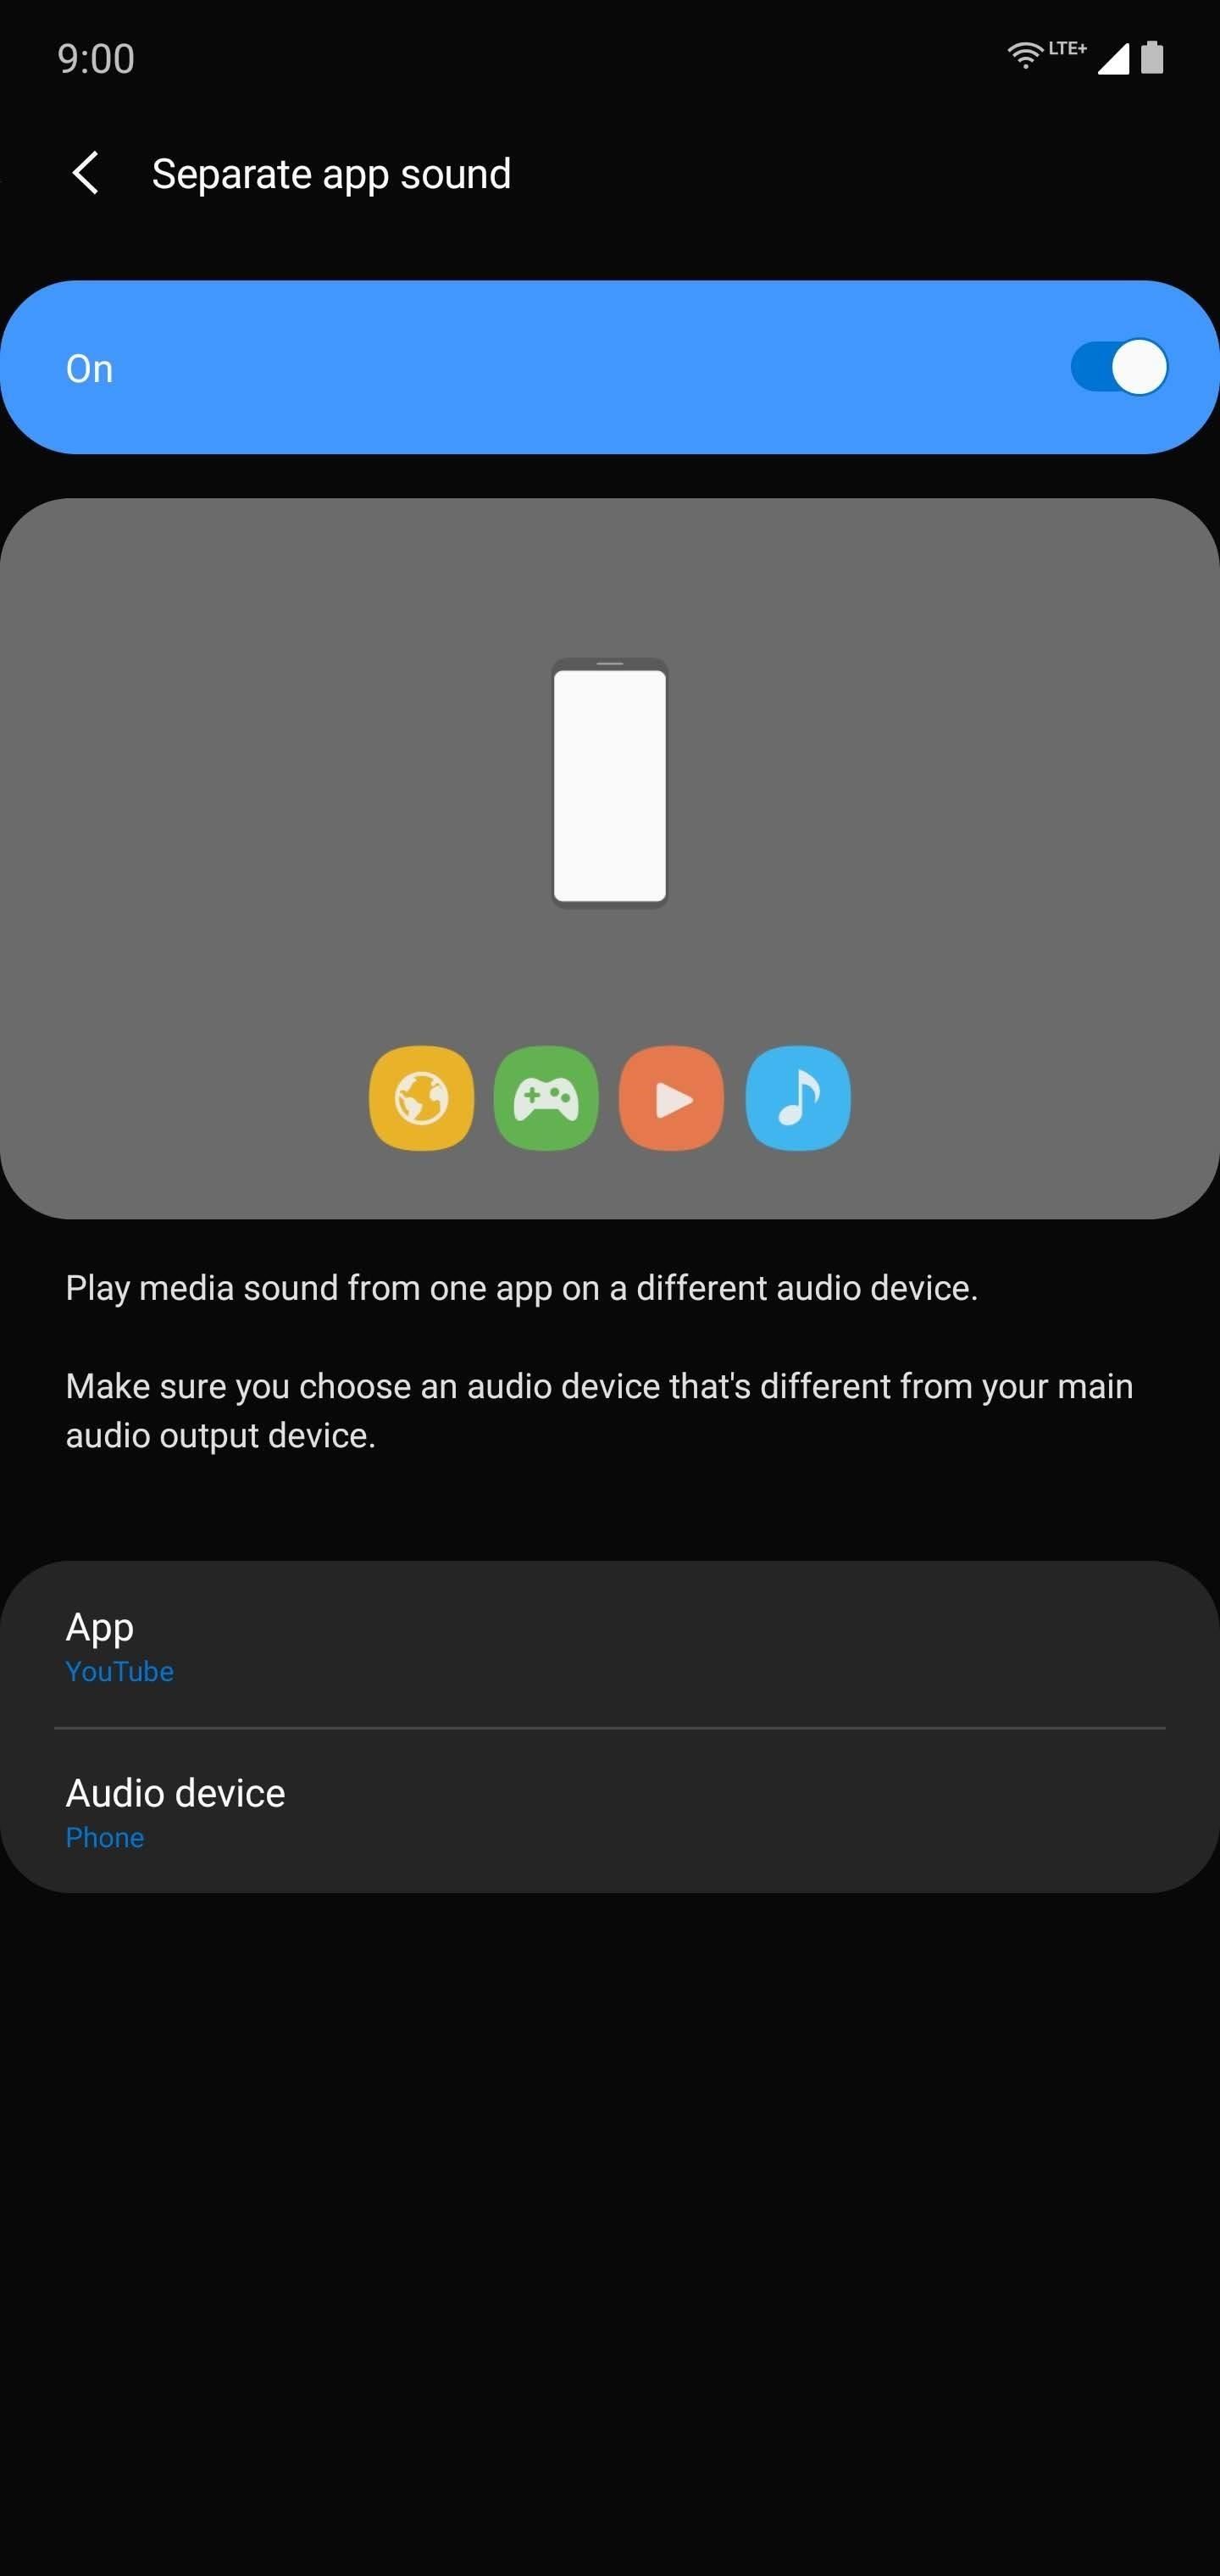 15 Ways to Improve Audio Performance on Your Galaxy Note 10+